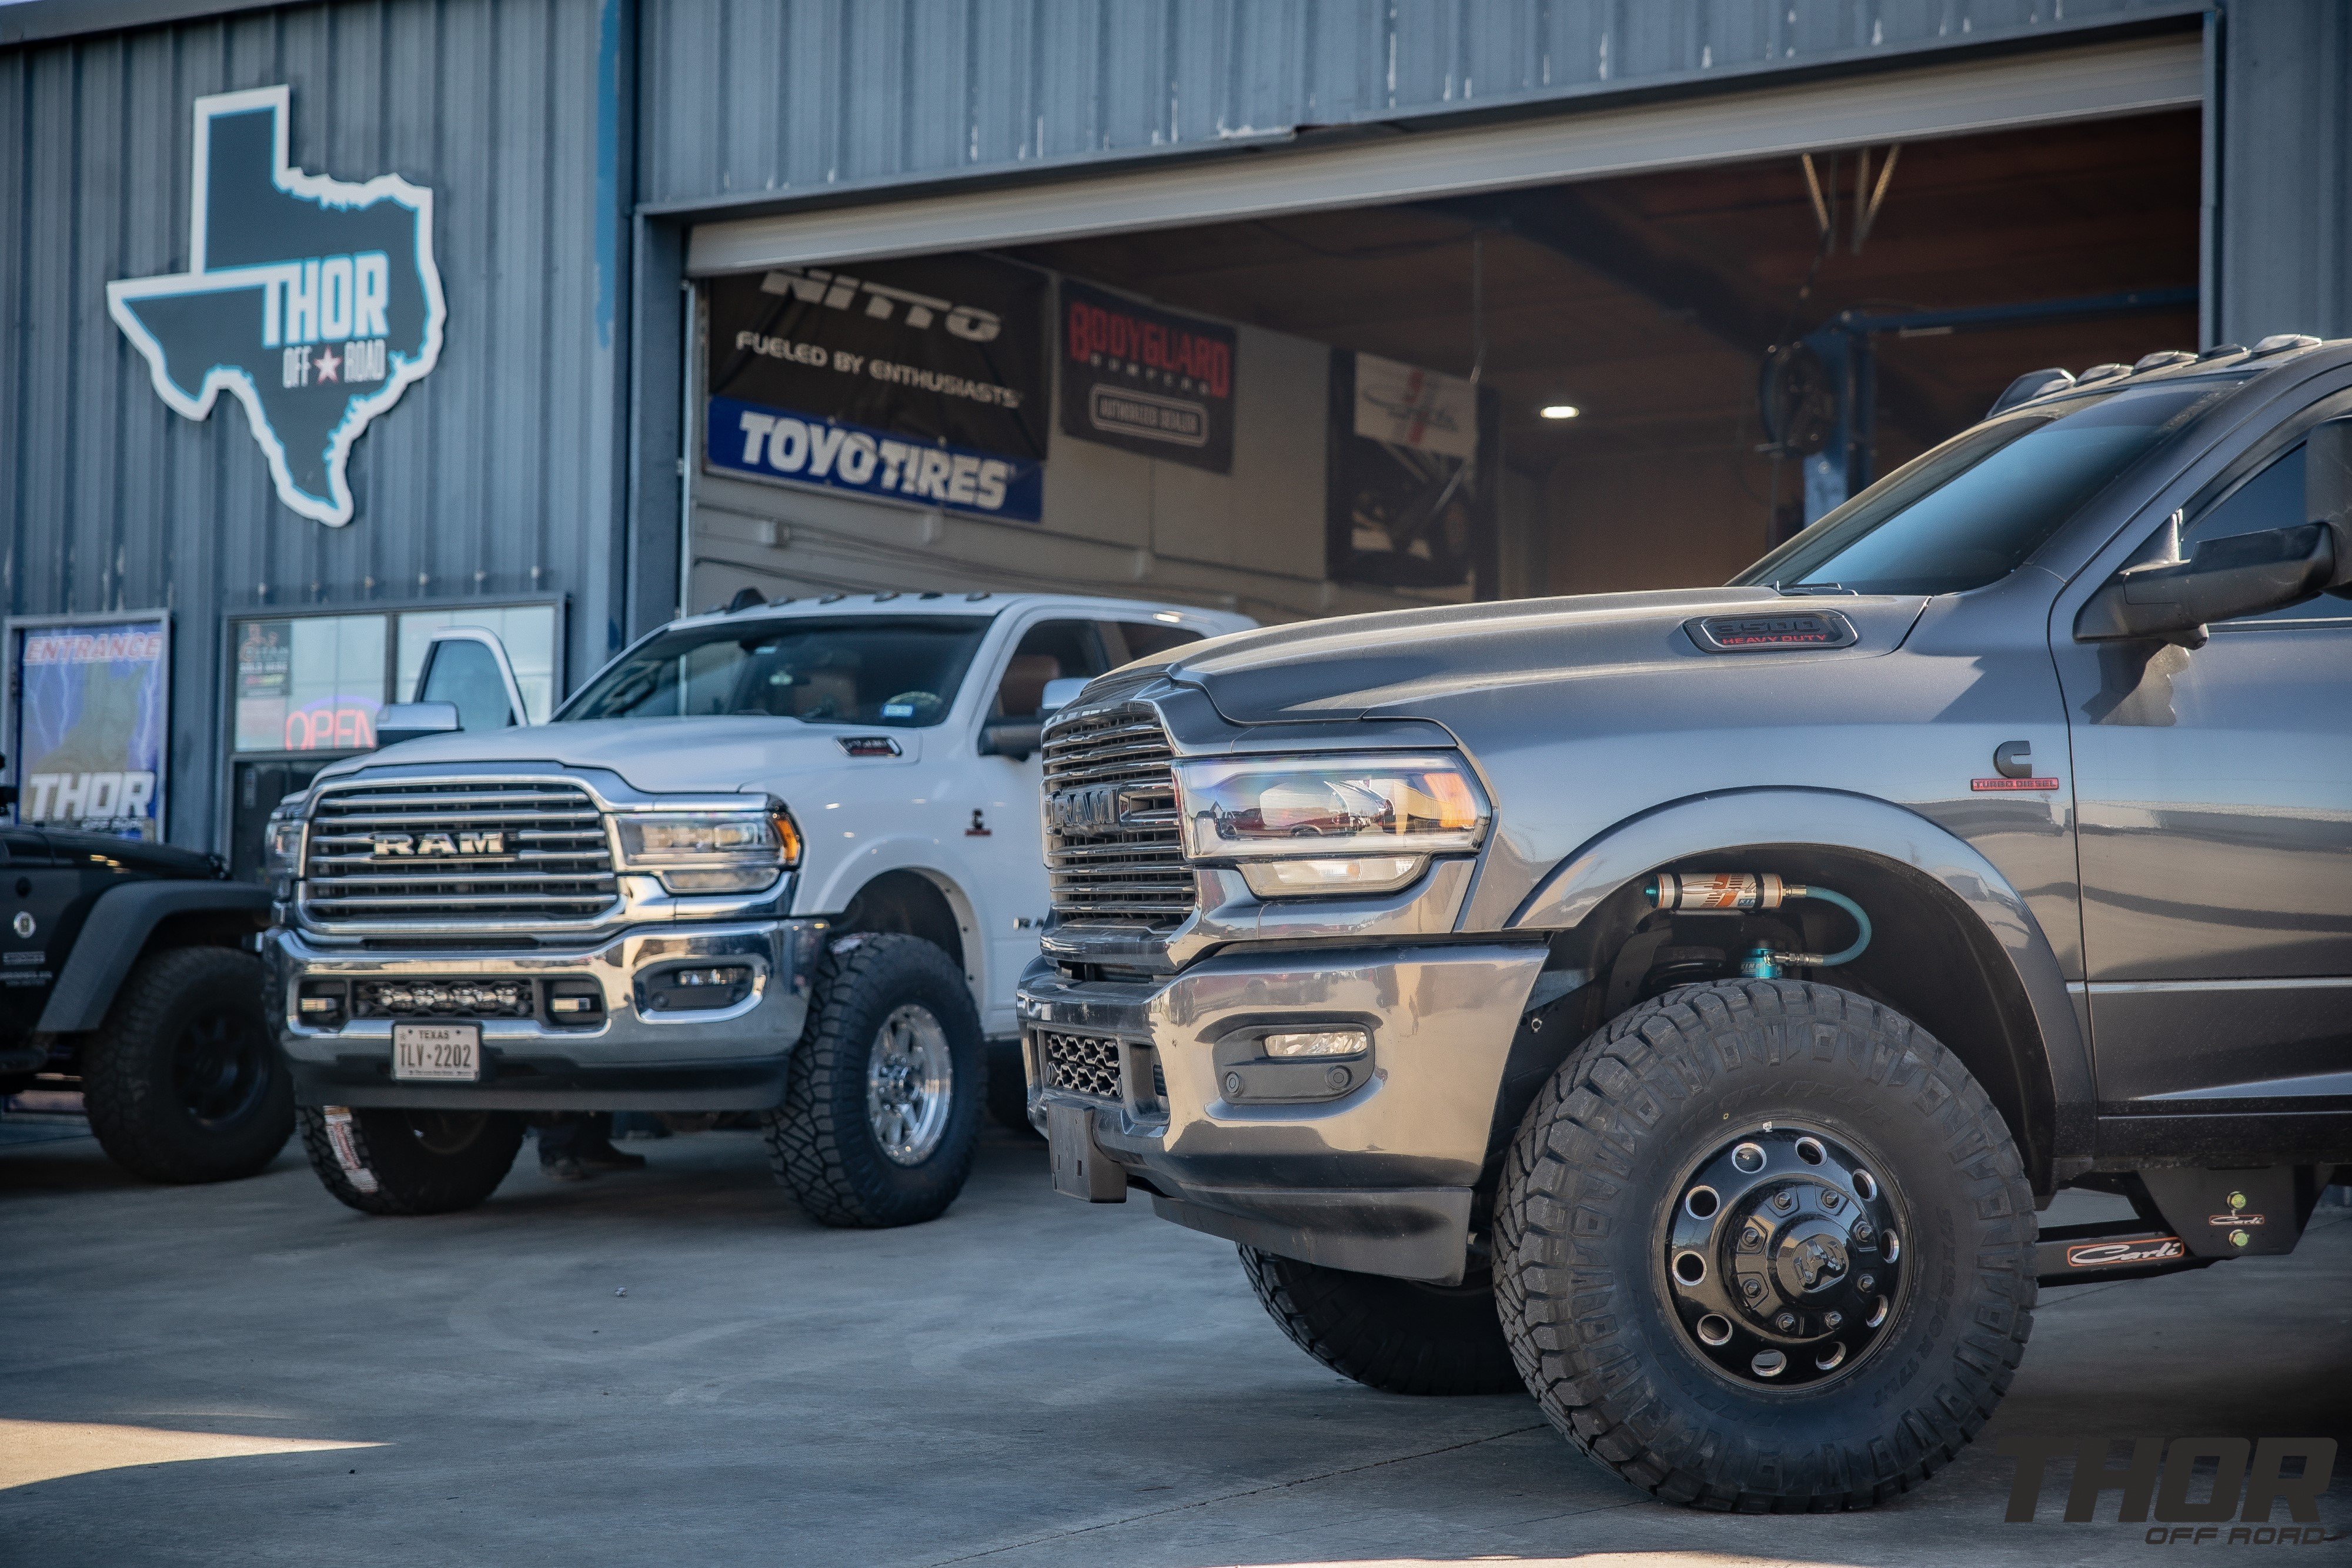 2022 RAM 3500 in Grey with Carli 3" Pintop Suspension System, Carli Fabricated Radius Arms, Carli Low Mount Steering Stabilizer, Carli High Mount Steering Stabilizer, Carli Ball Joints, Carli Add-a-Pack, Air Lift 5000 Load Lifter Kit, 37x12.50R17 Nitto Ridge Grappler Tires